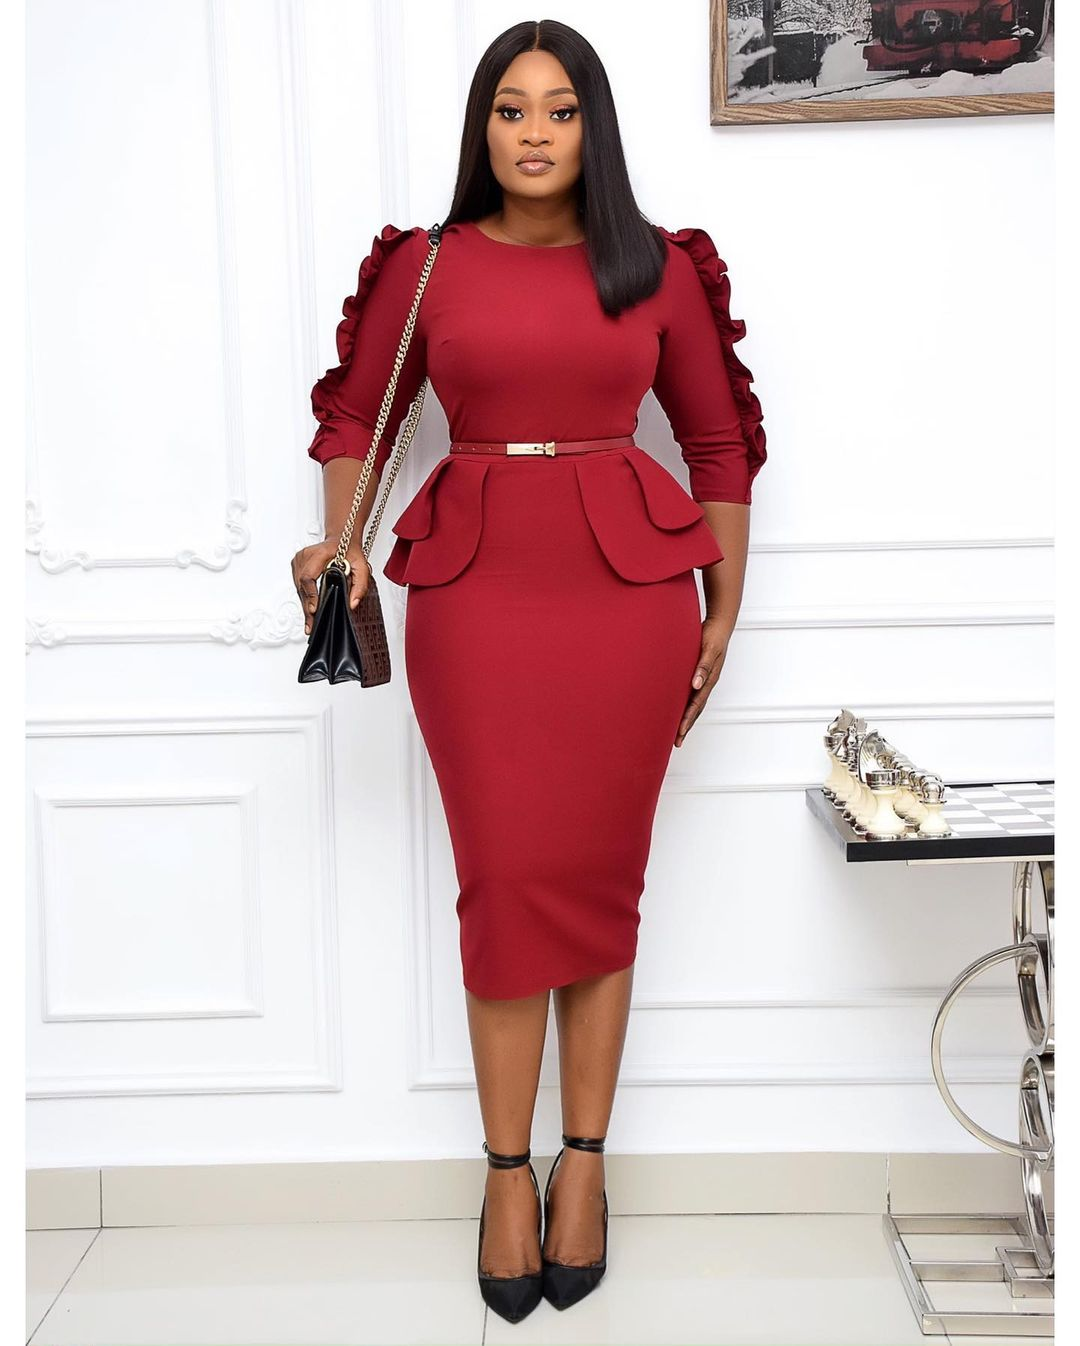 Latest English Gown Styles for Ladies - Buy and Slay